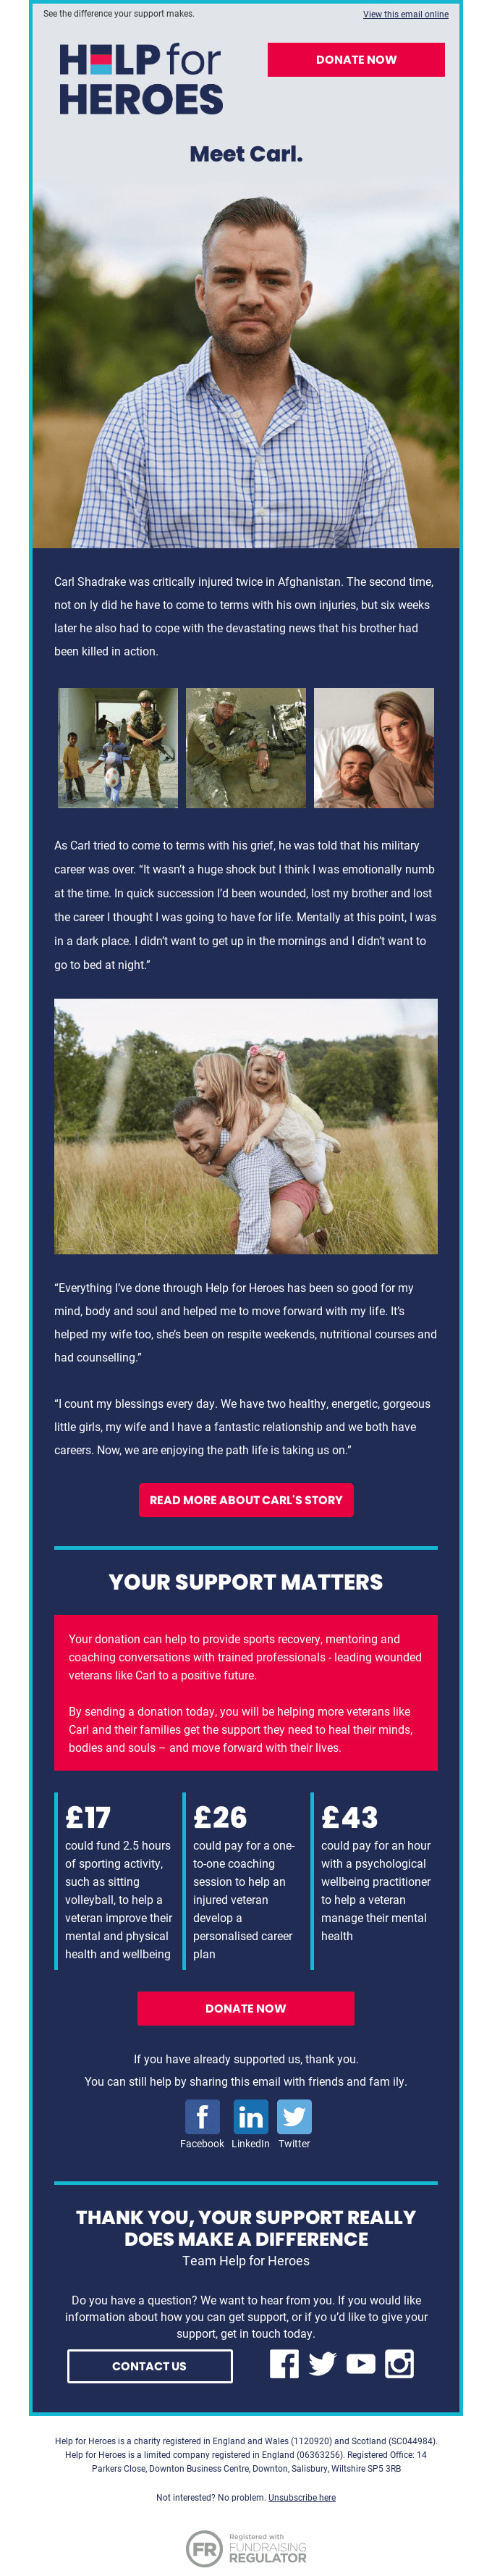 Email from Help for Heroes